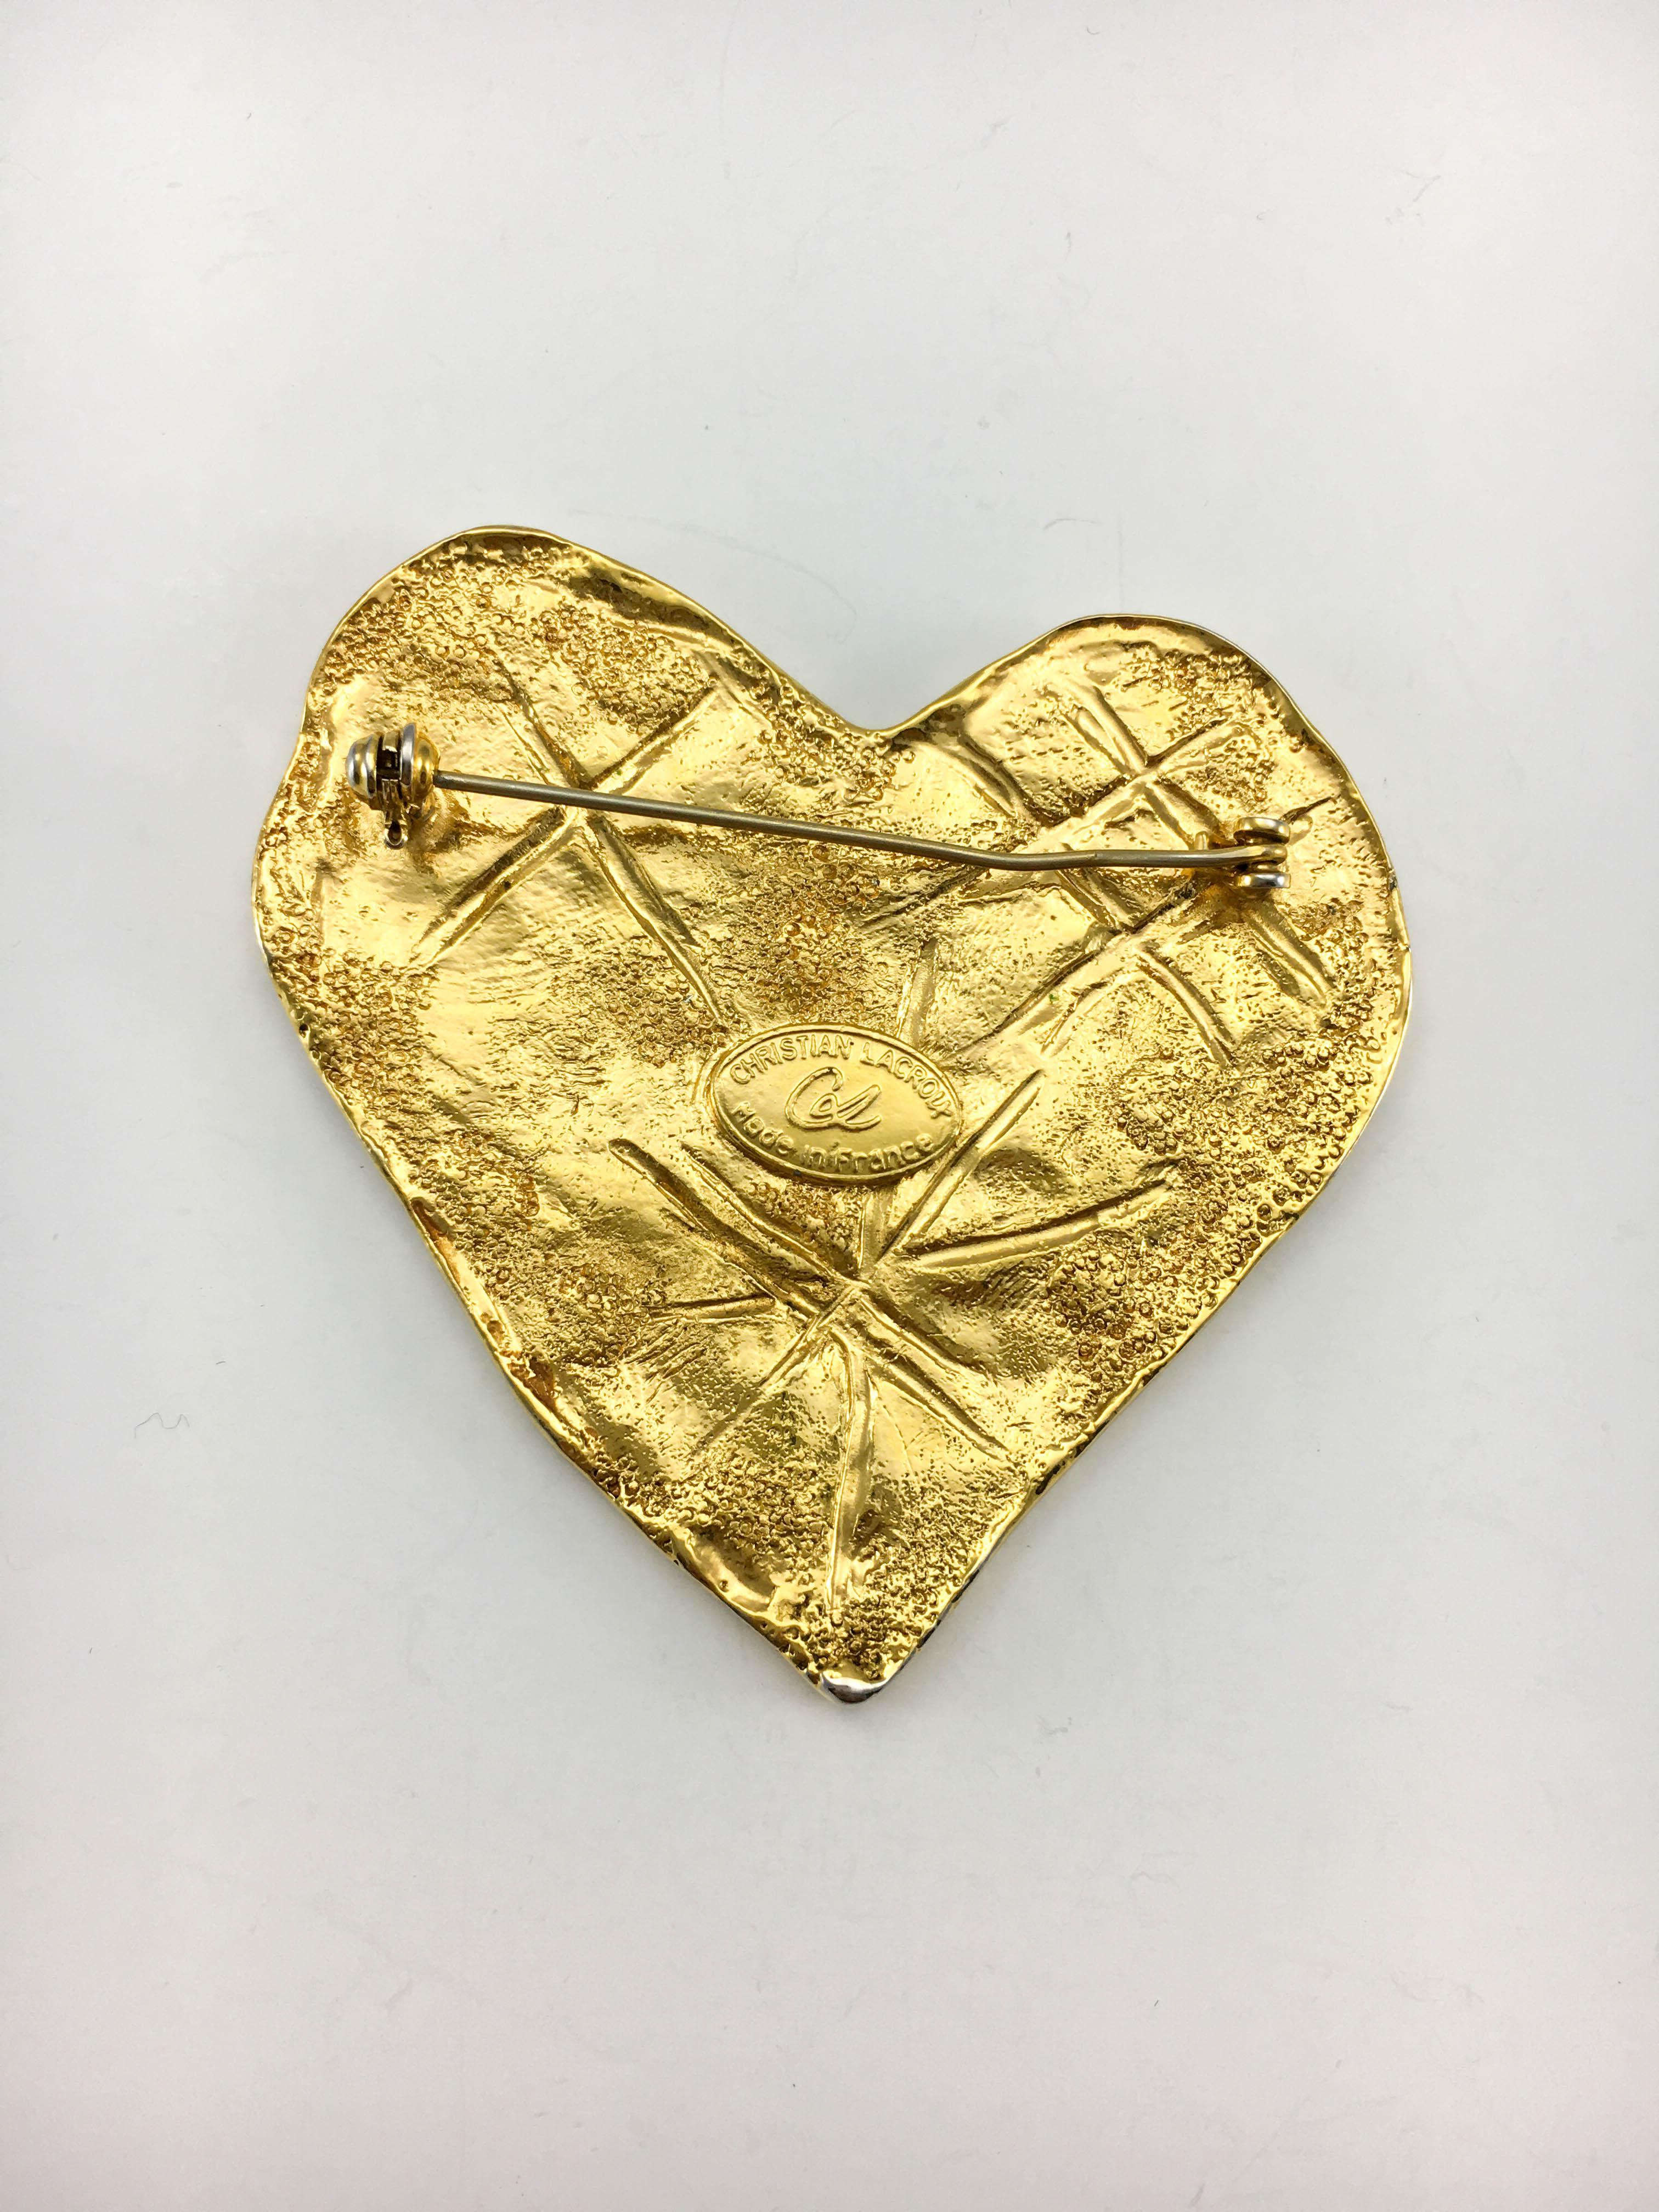 1994 Lacroix Gold-Plated Modernist Heart Brooch, by Goossens For Sale 1